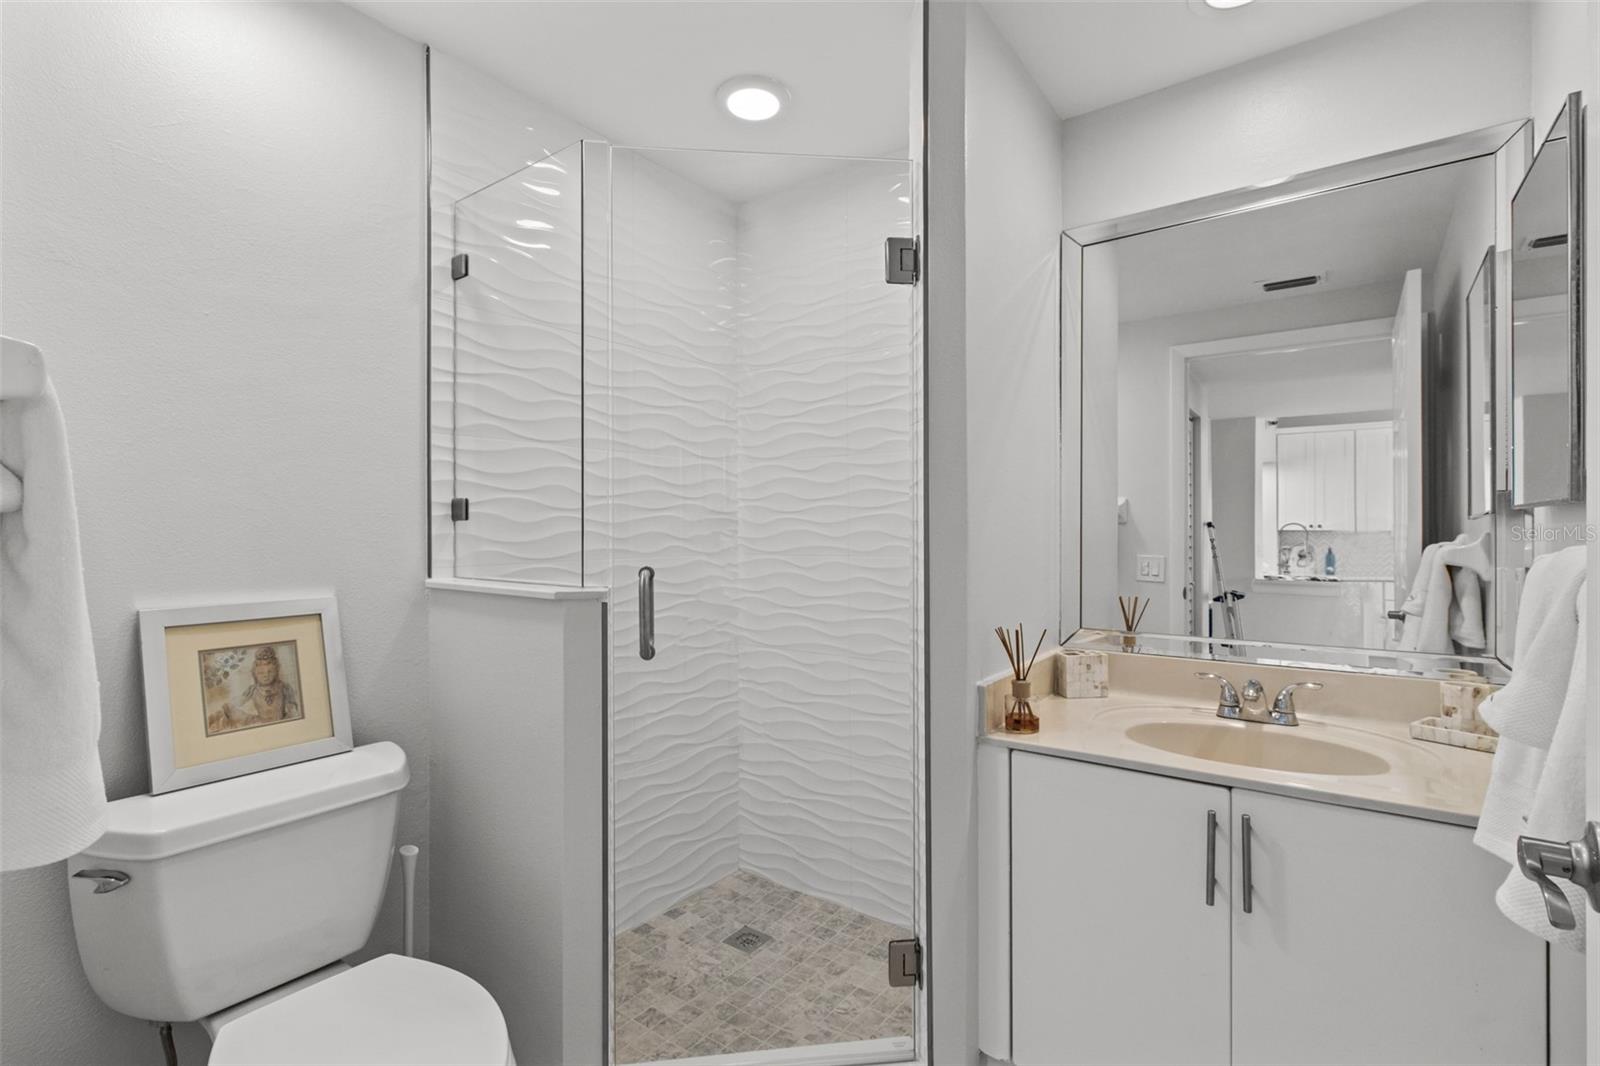 Experience a touch of coastal charm in the newly renovated guest bathroom, featuring elegant coastal tiles and sleek glass shower doors.